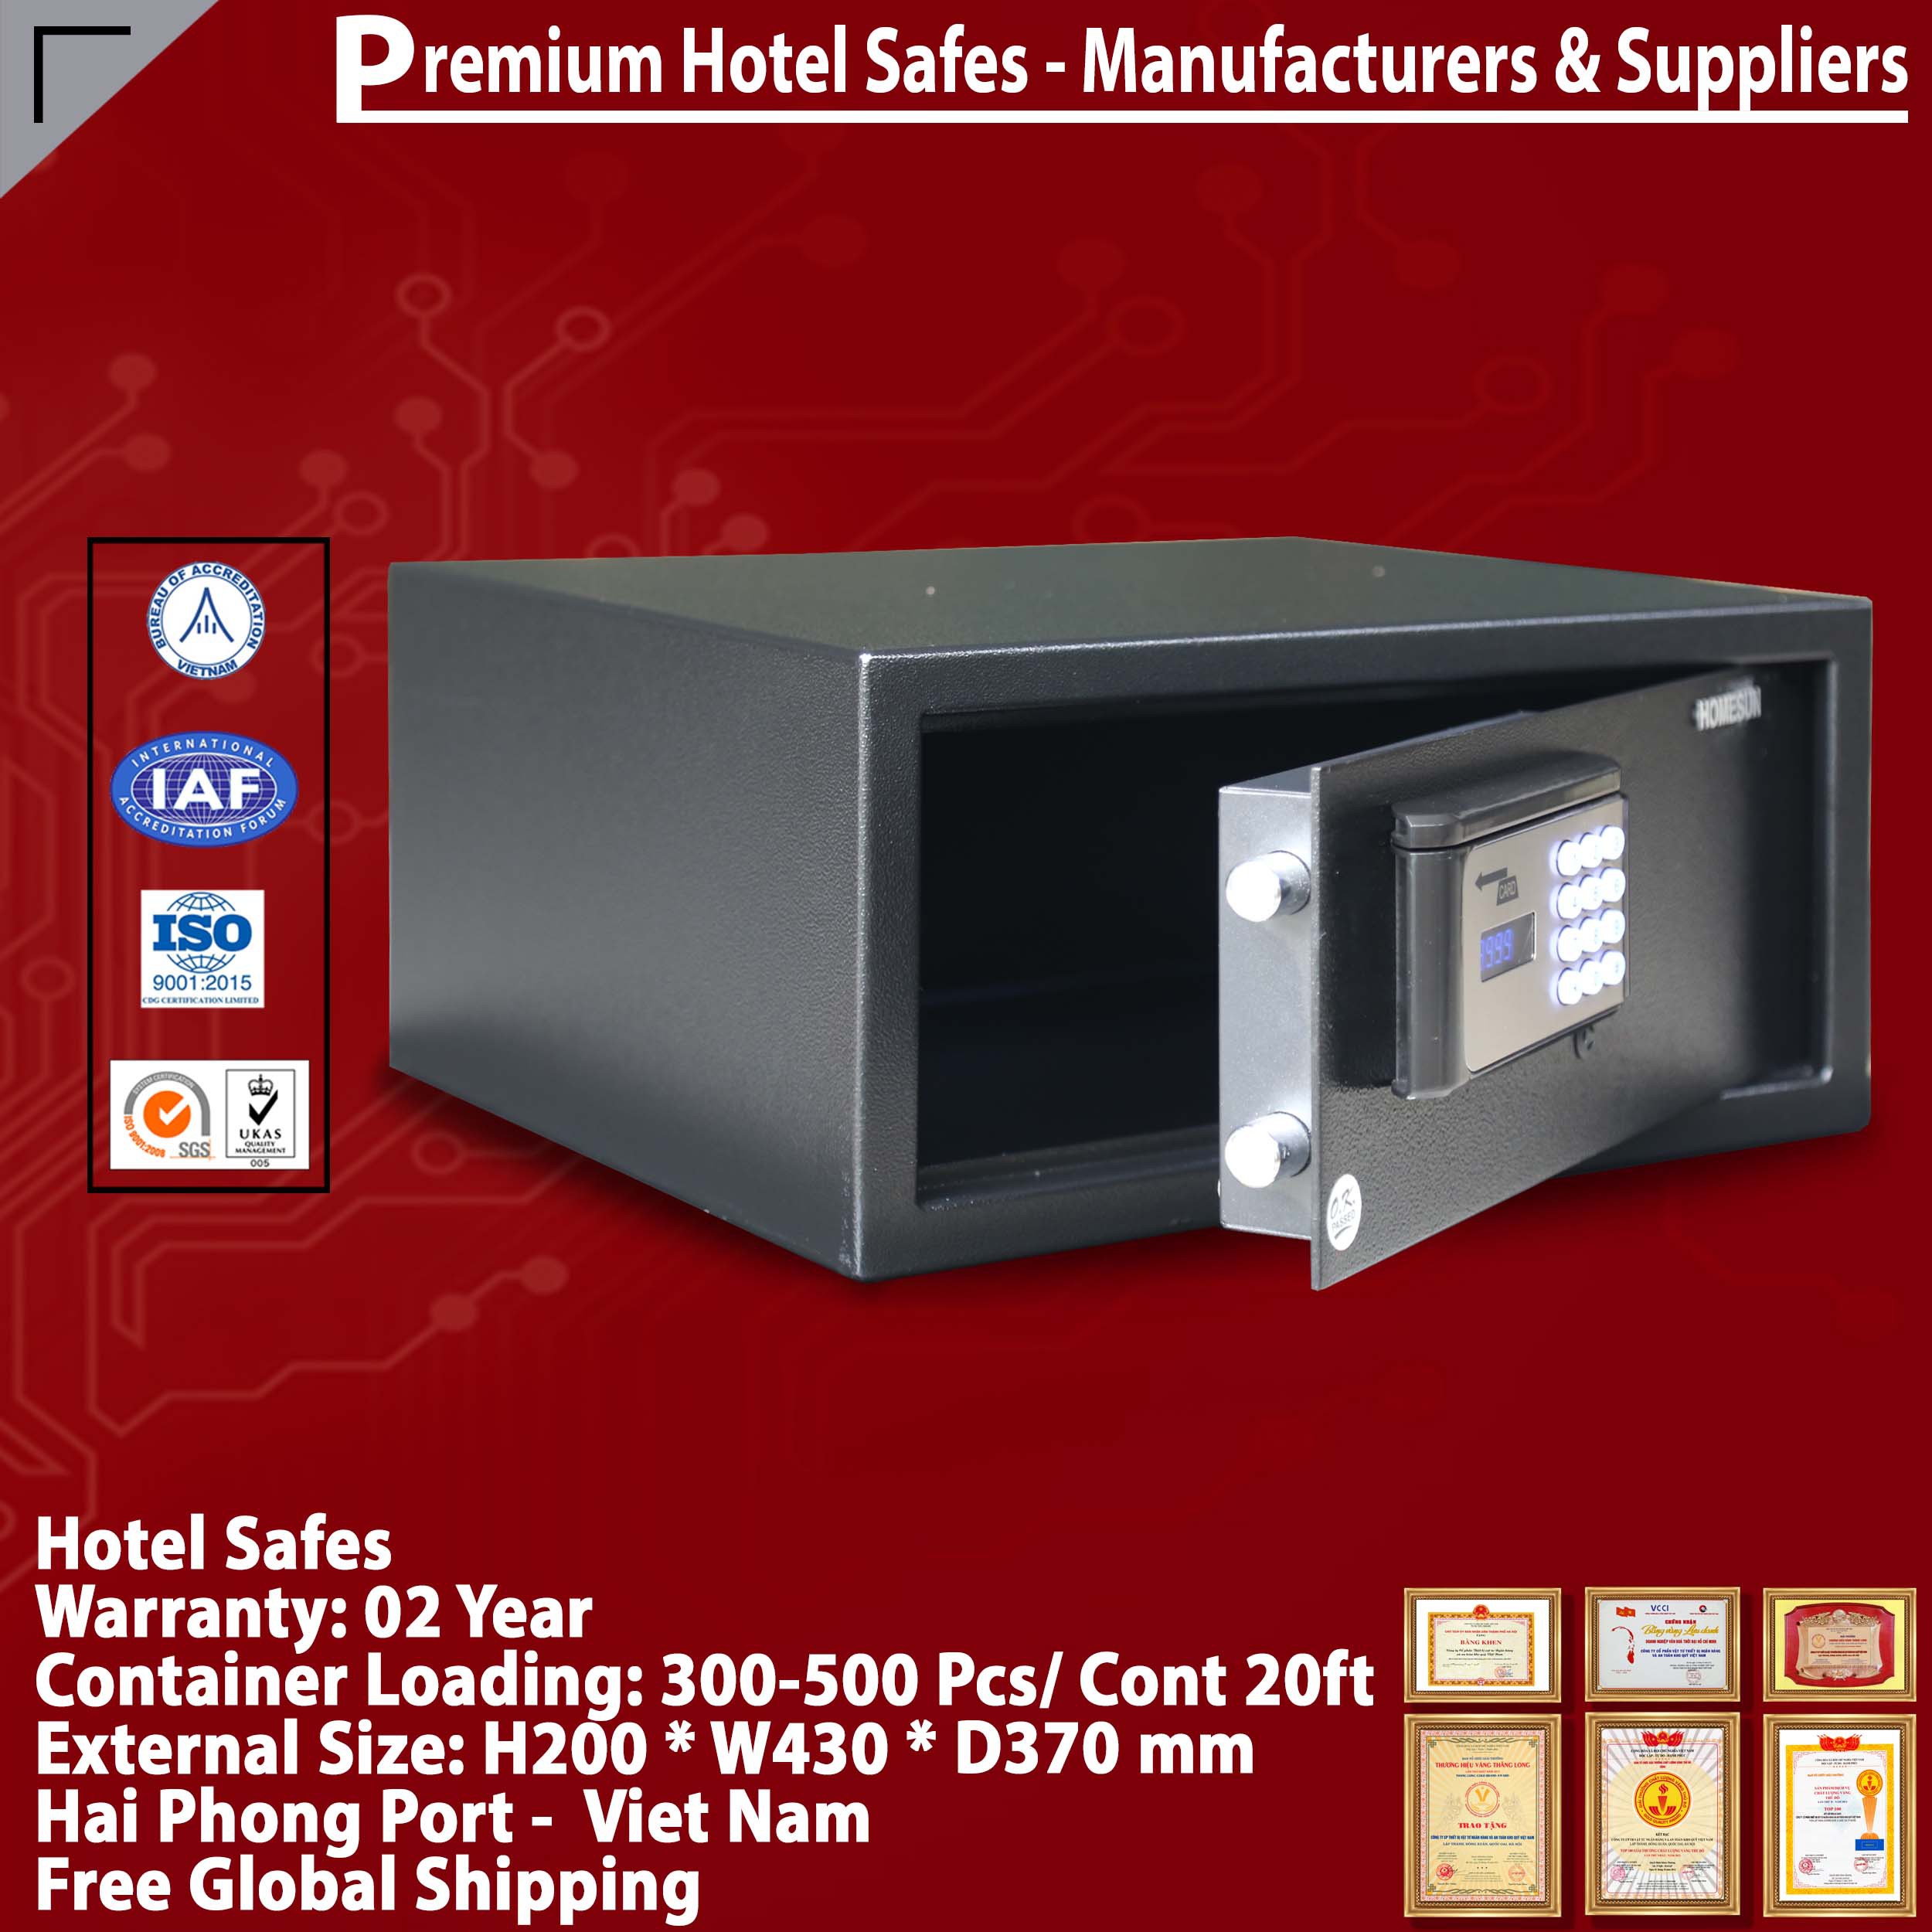 Hotel Safe Dimensions High Quality Price Ratio‎